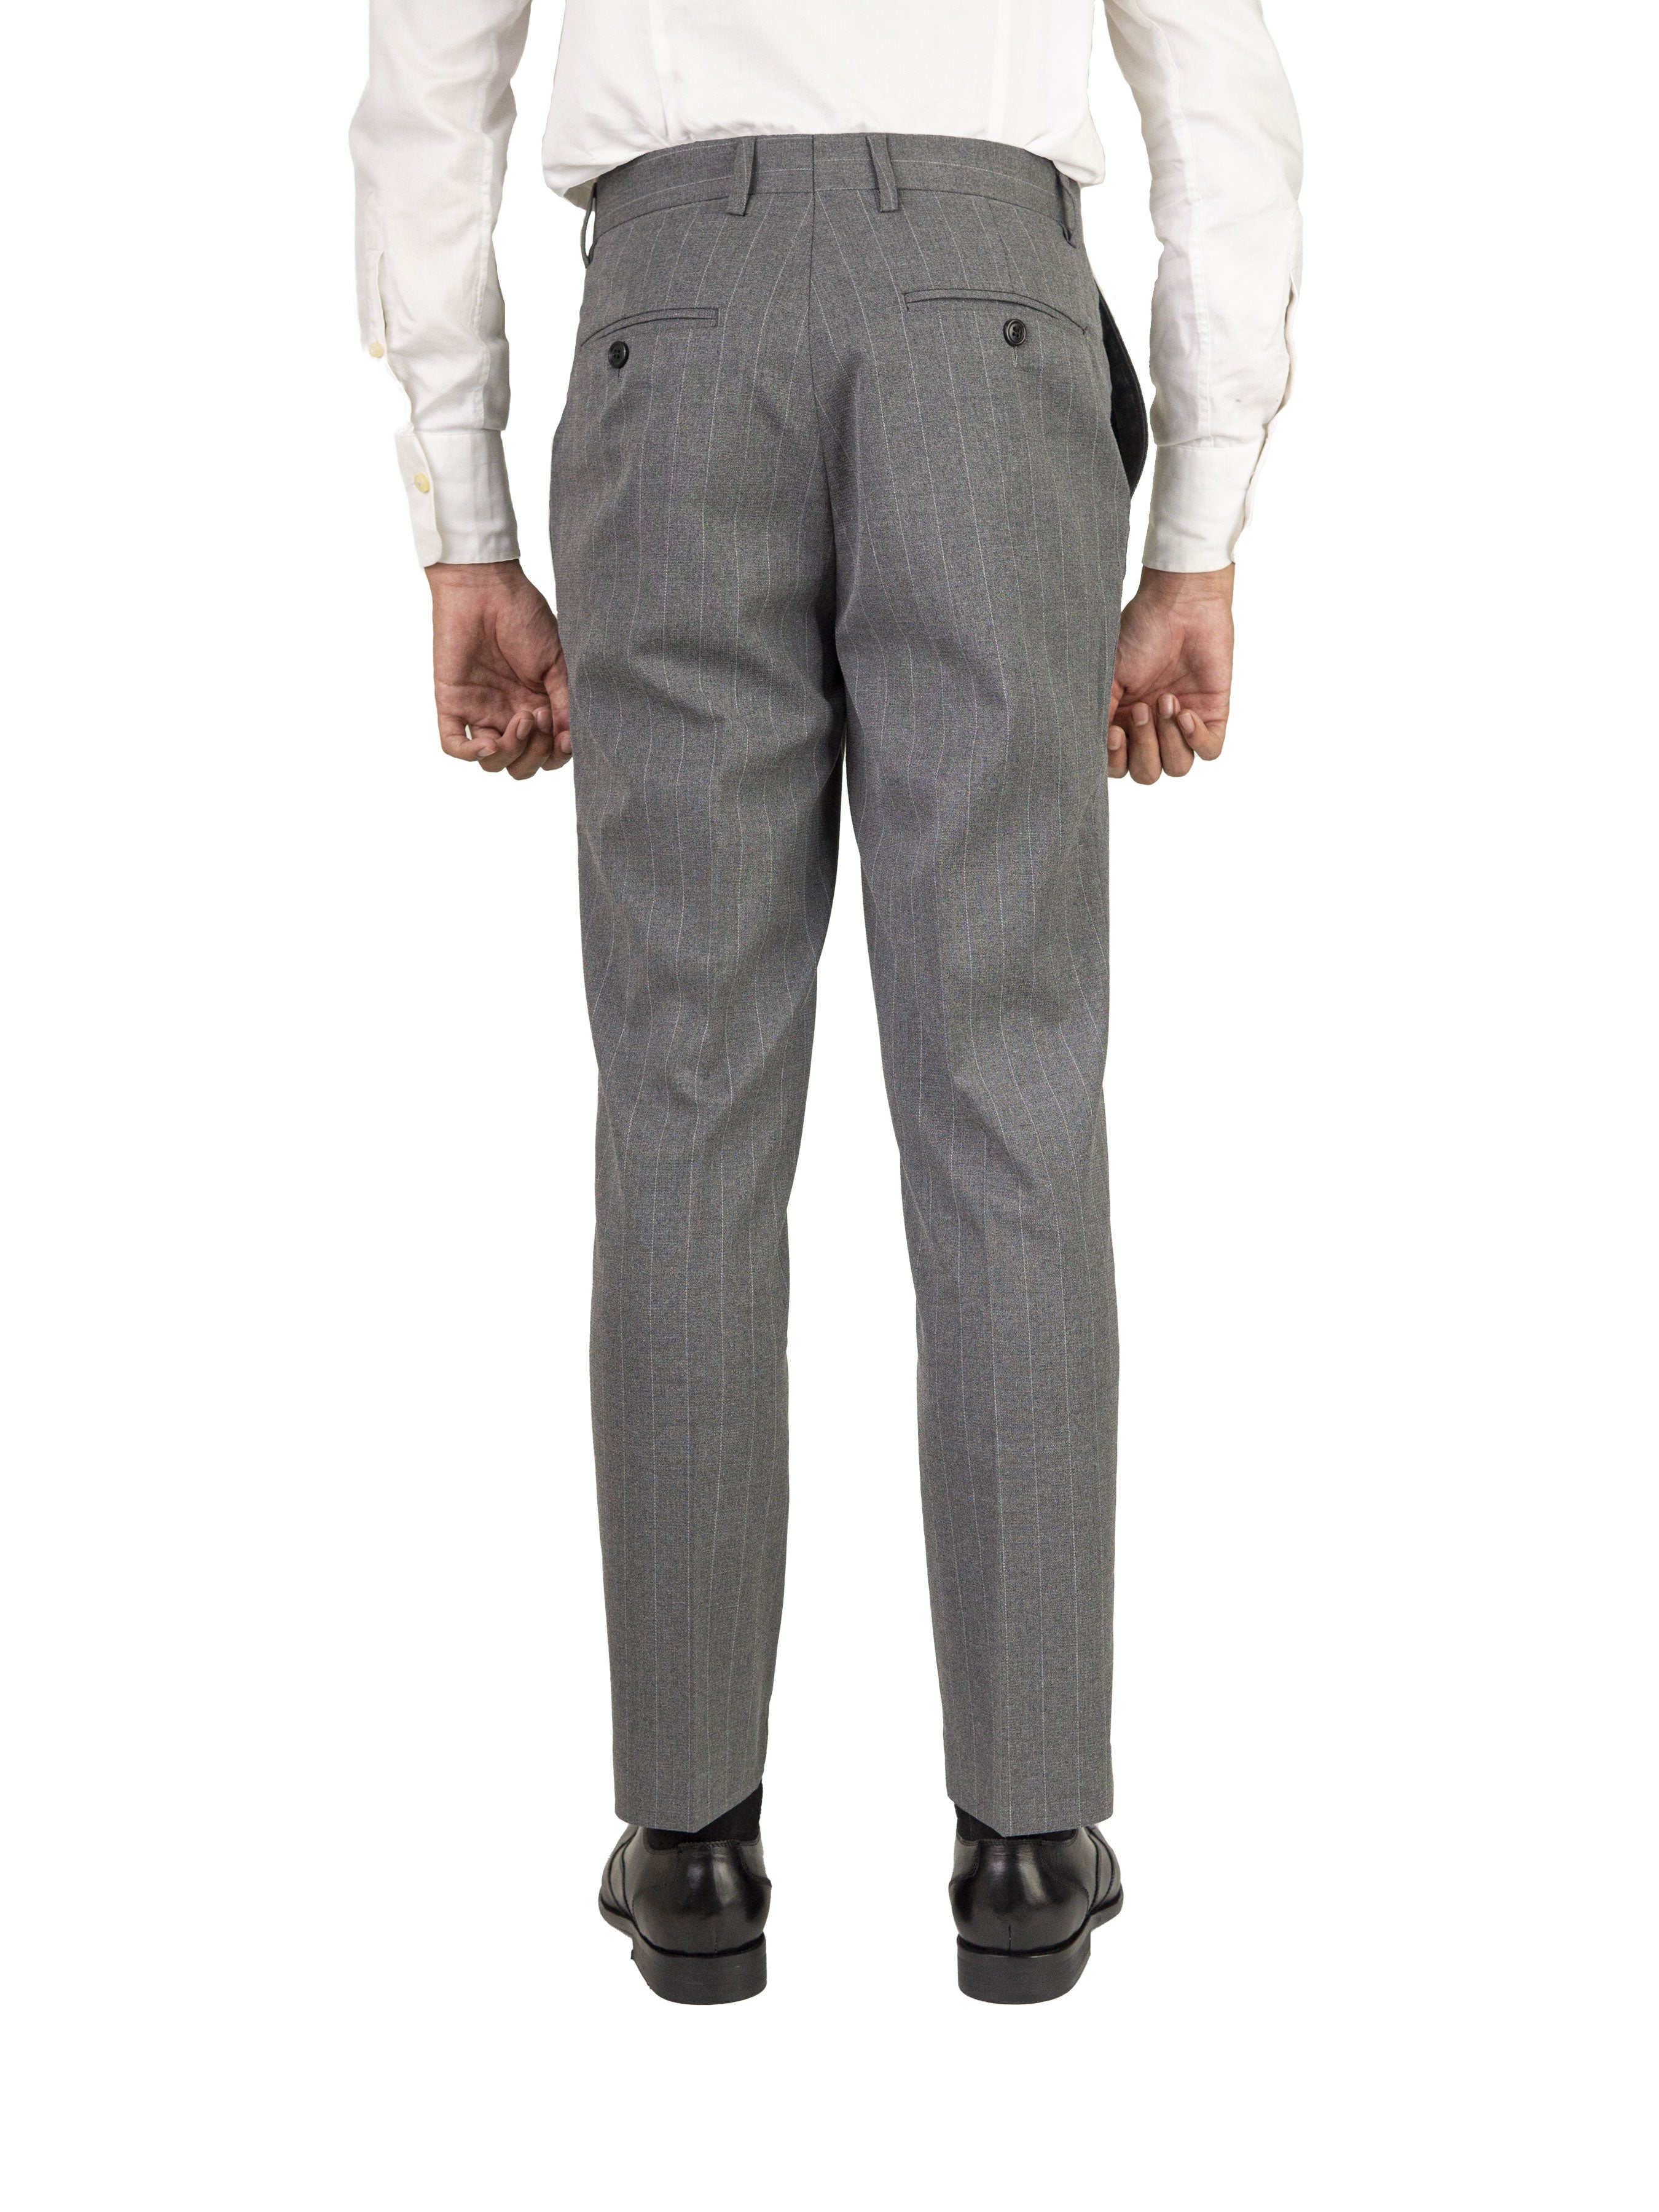 Trousers With Belt Loop -  Grey Stripes (Stretchable) - Zeve Shoes